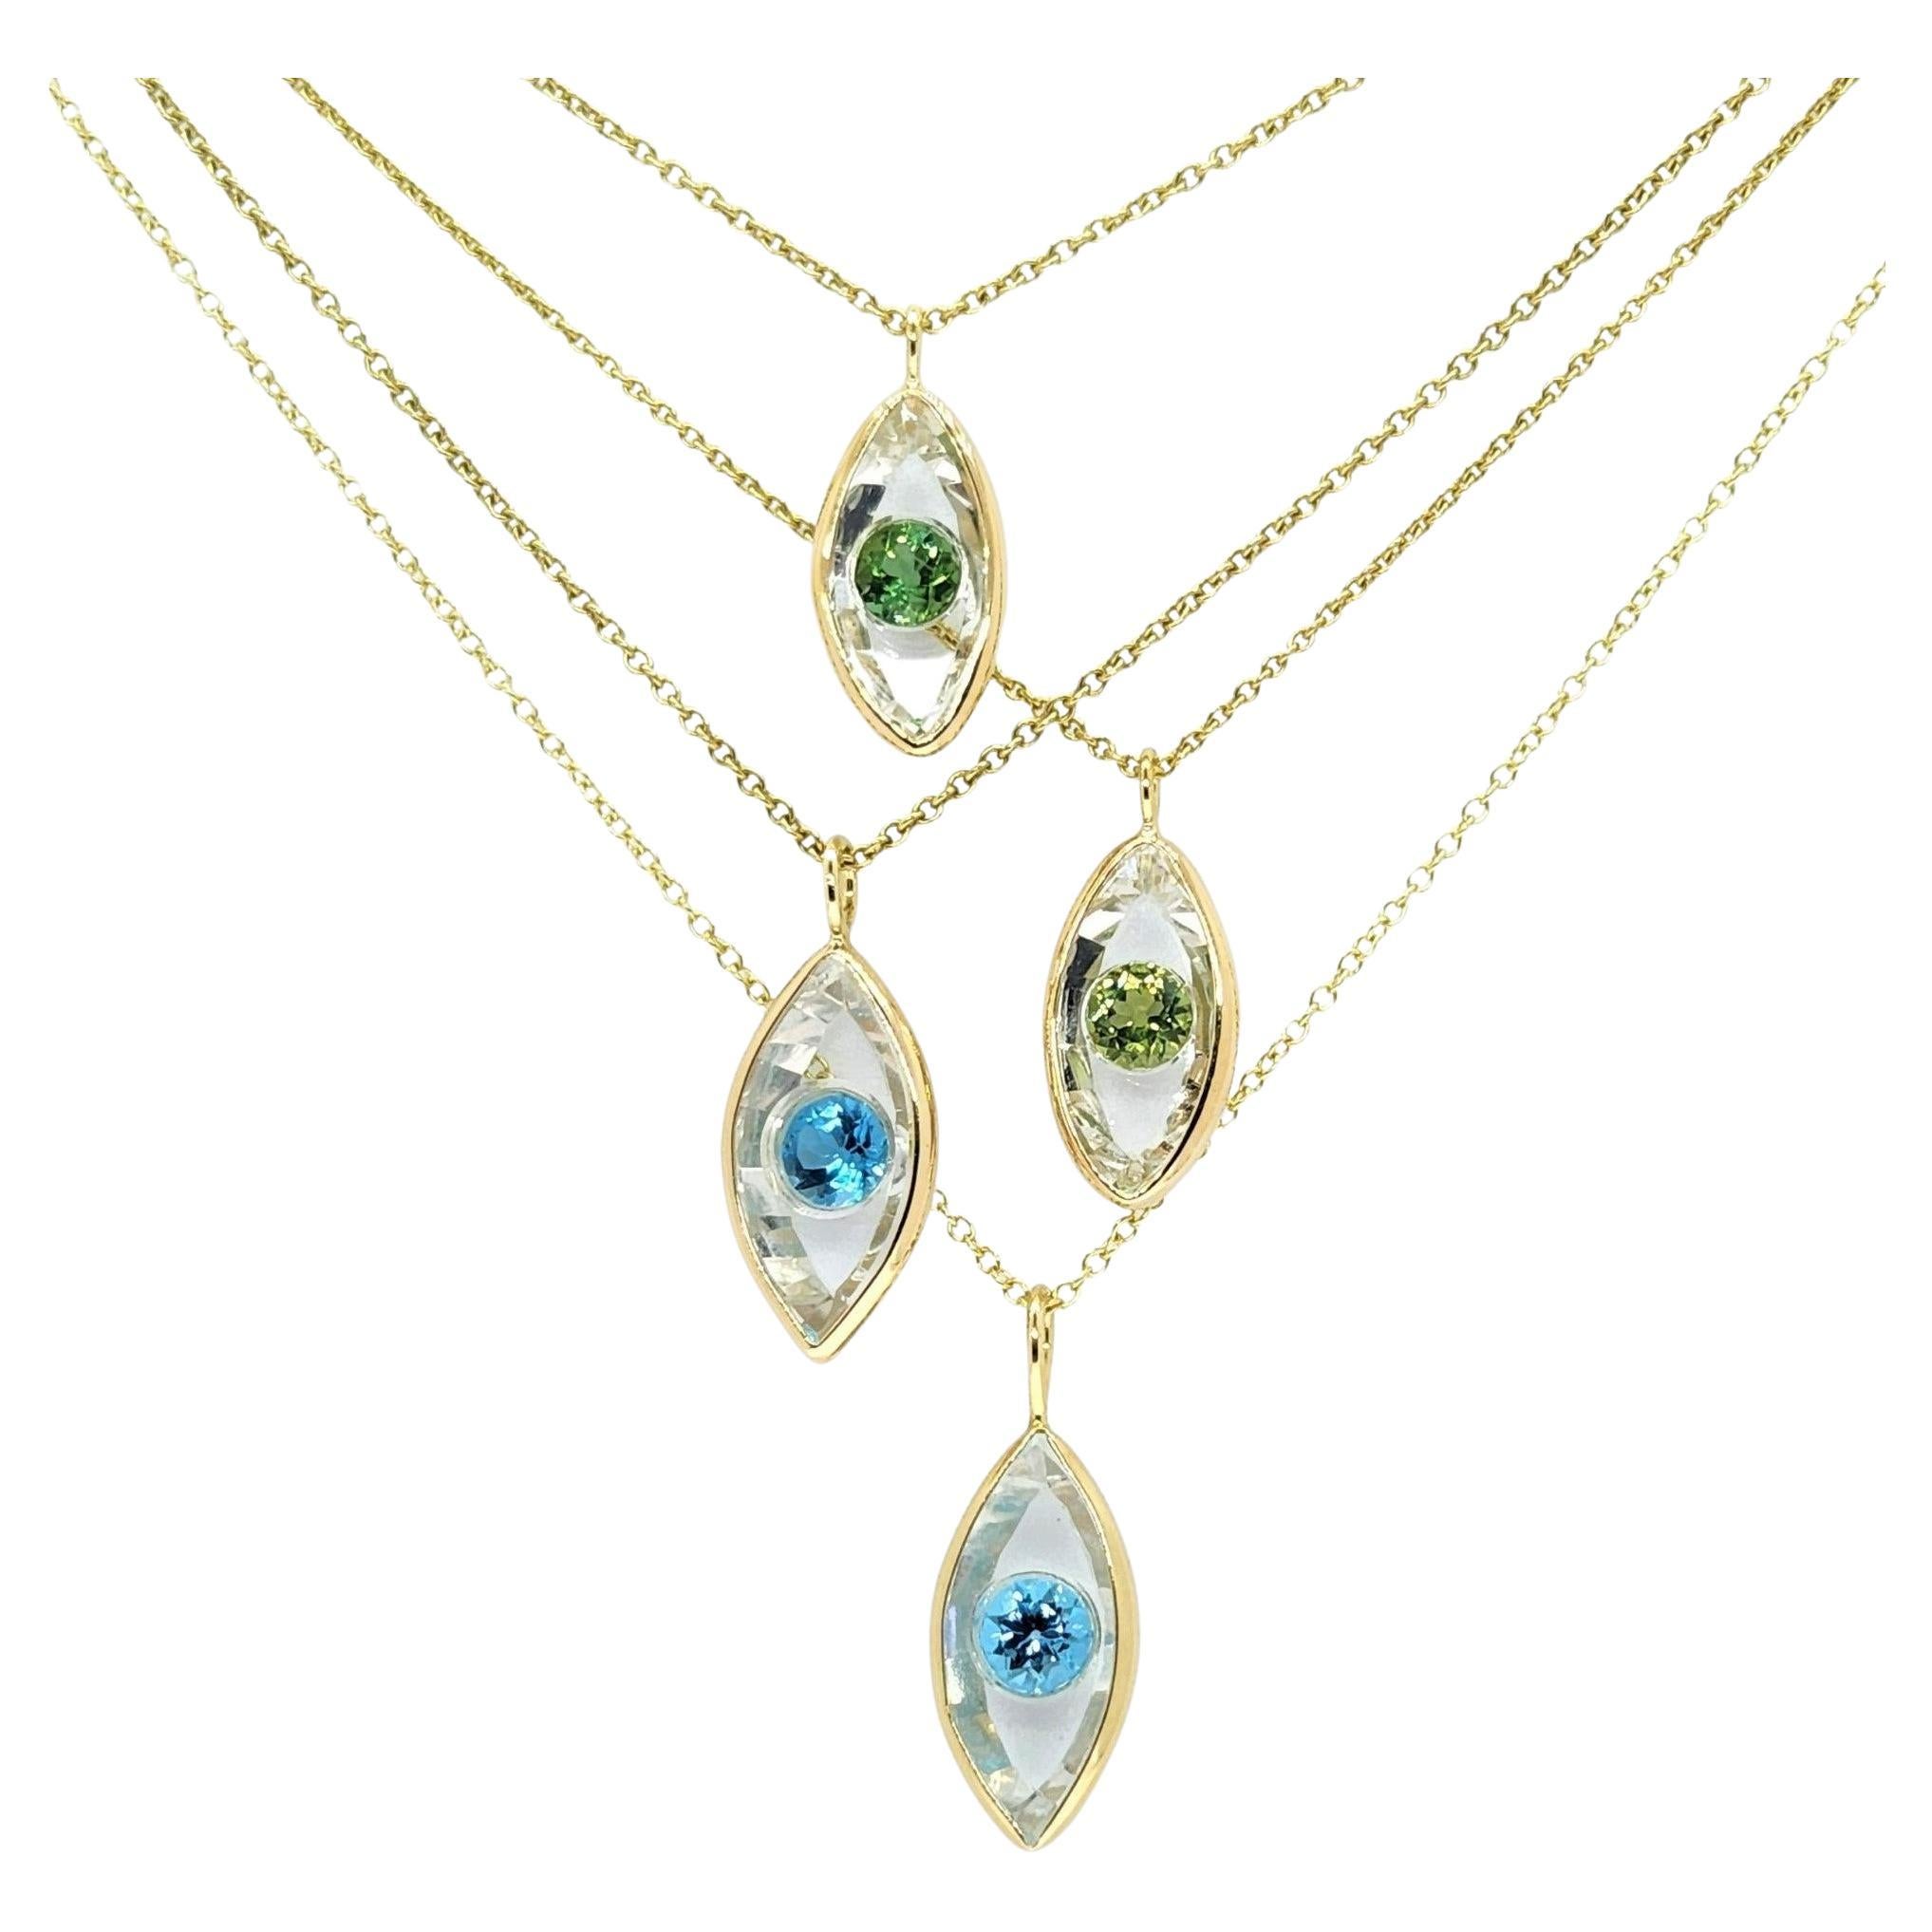 Protective Evil Eye Necklace in 14K Gold and Quartz with Blue Topaz or Peridot For Sale